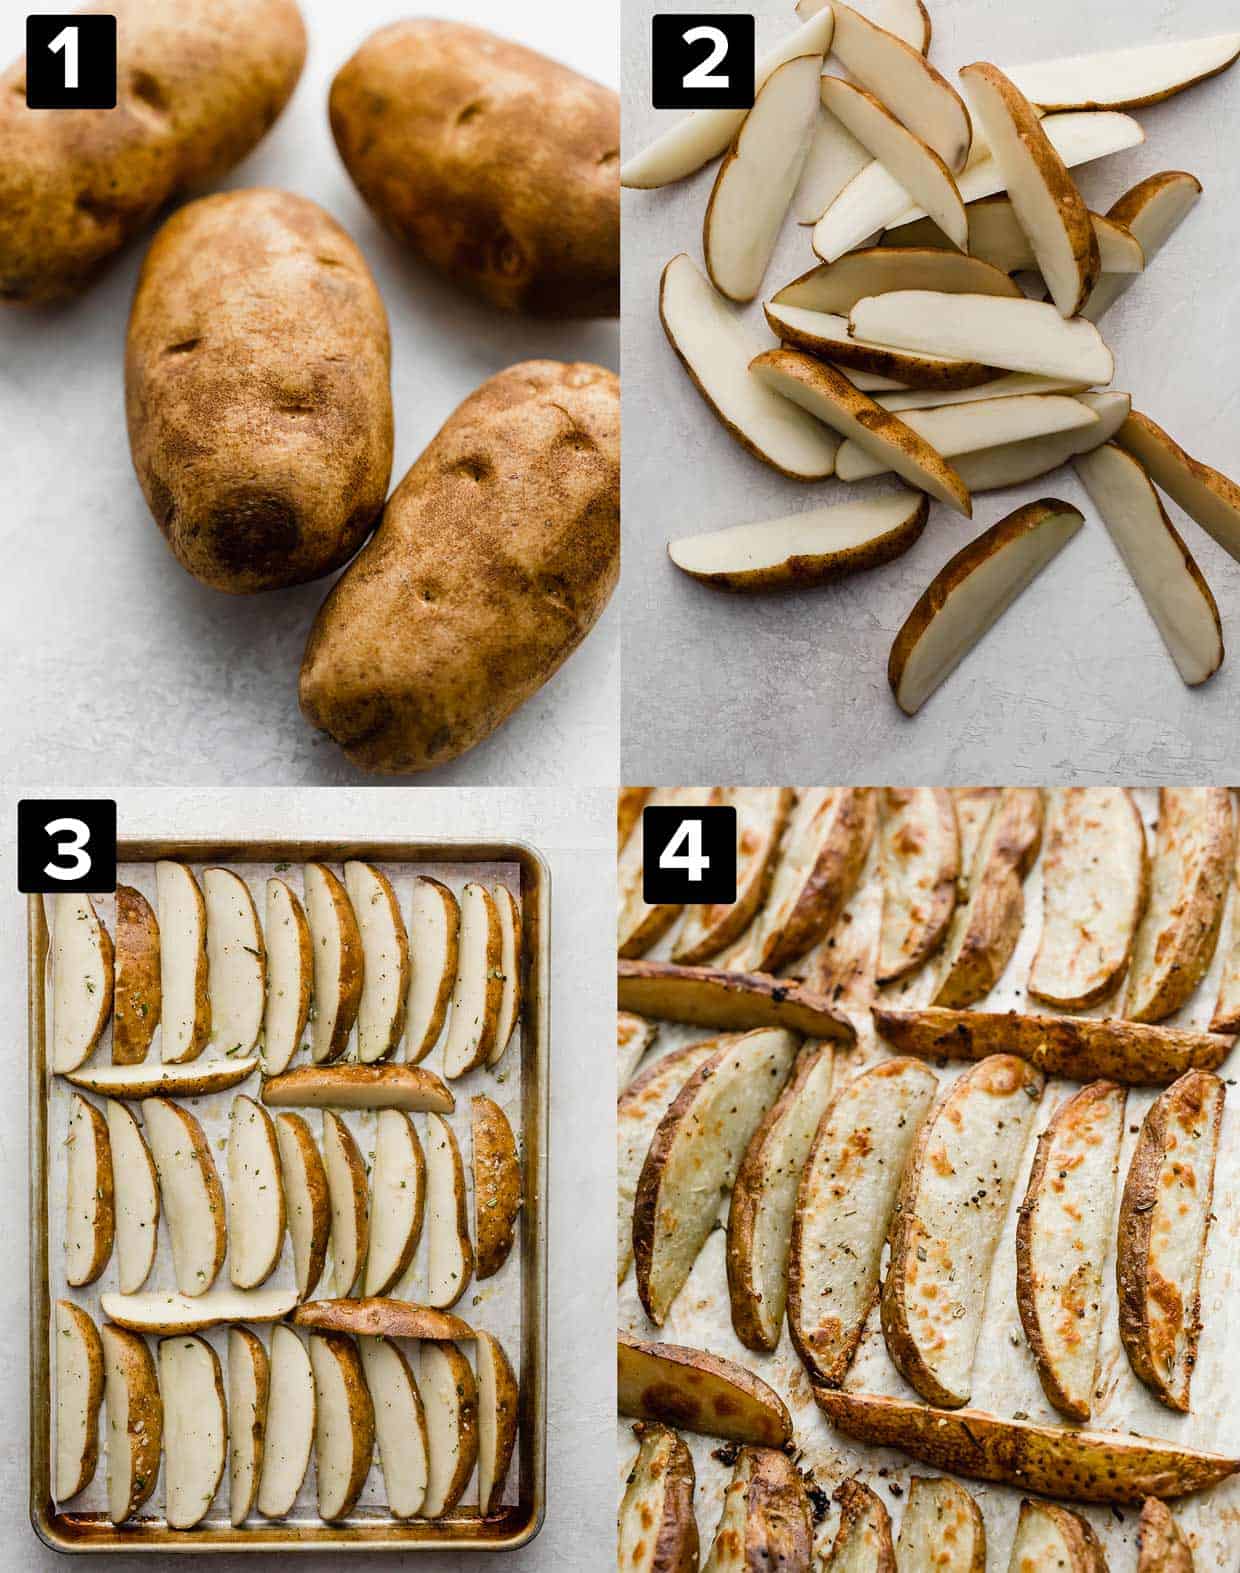 A four photo collage of Crispy Baked Potato Wedges in the making: russet potatoes, russet potatoes sliced into wedges, wedges on a sheet, and baked potato wedges. 